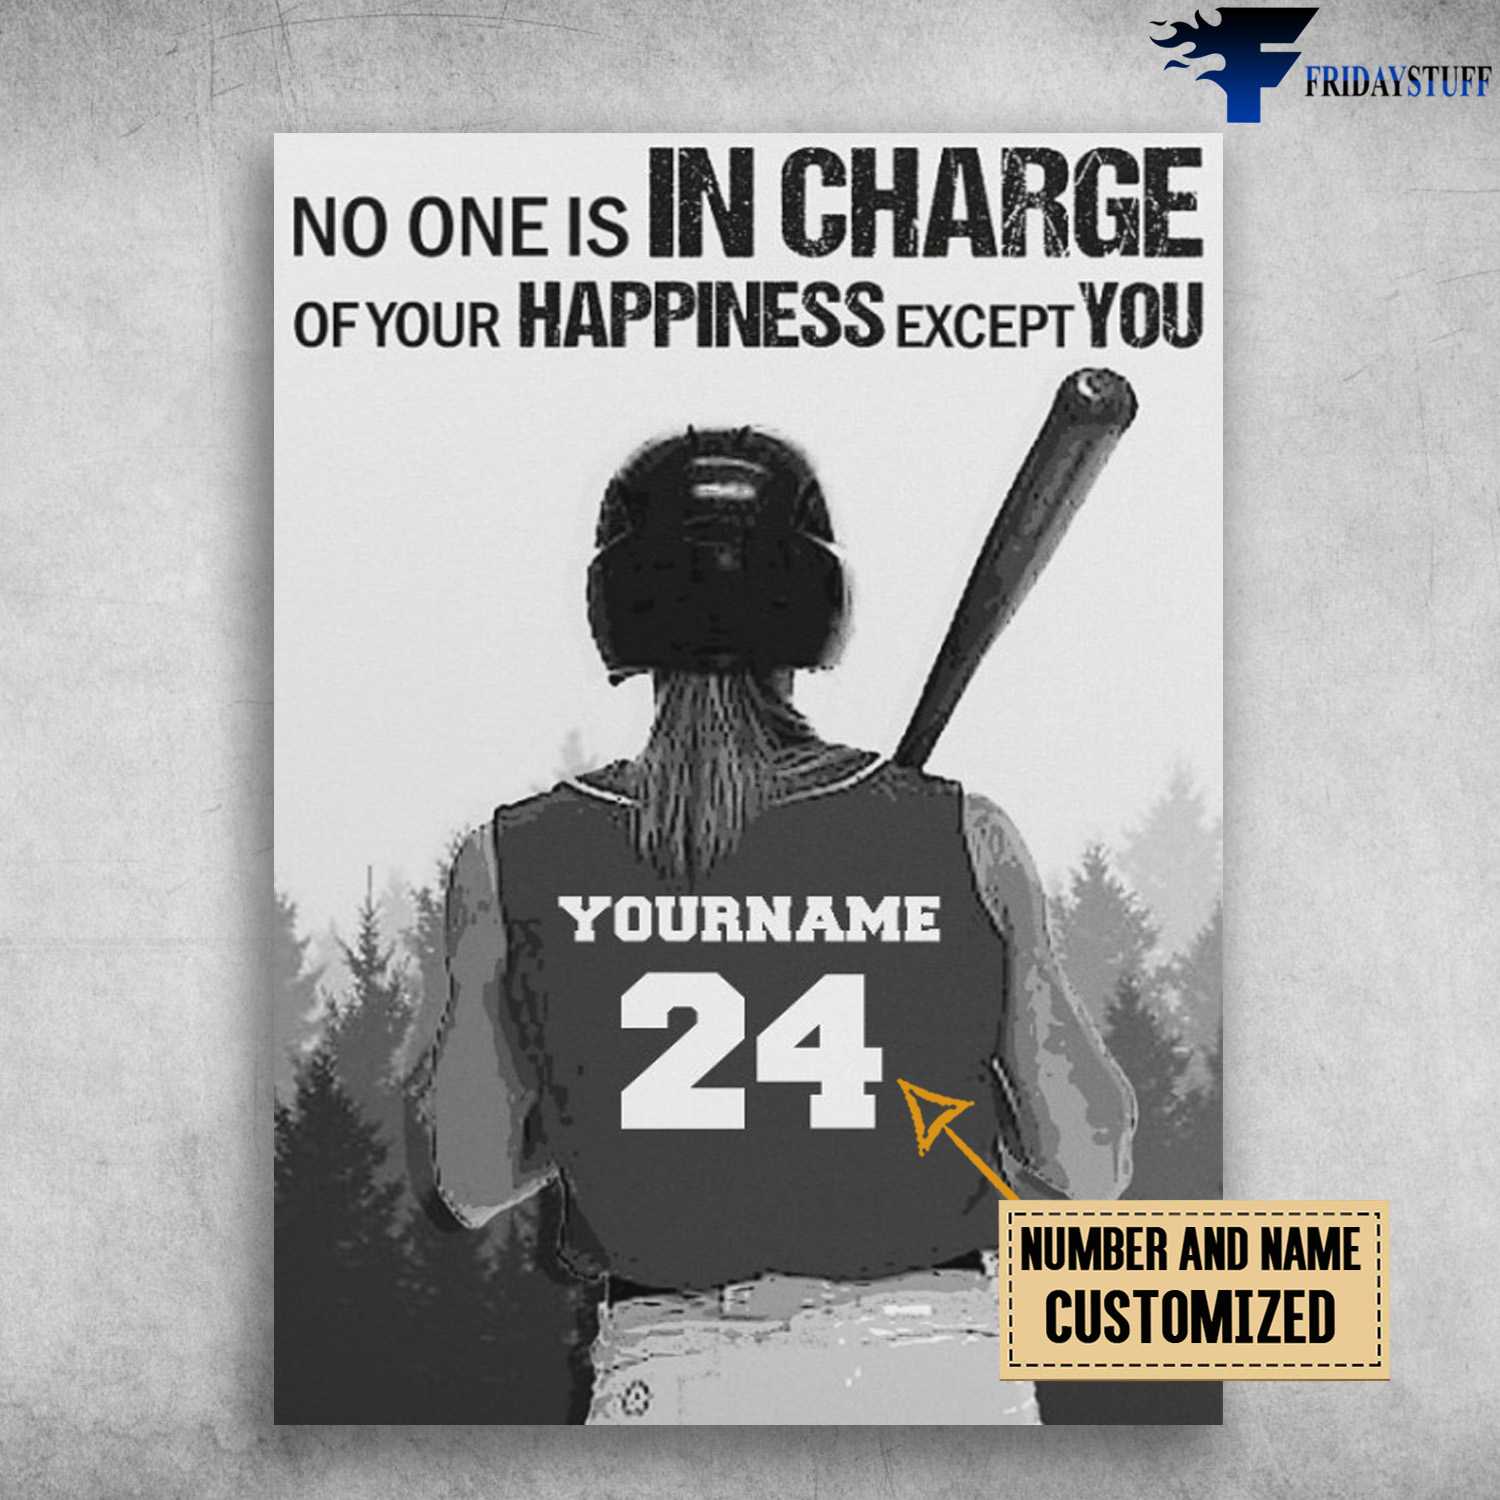 Girl Loves Baseball, Baseball Poster, No One In Charge, Of Your Happiness Except You